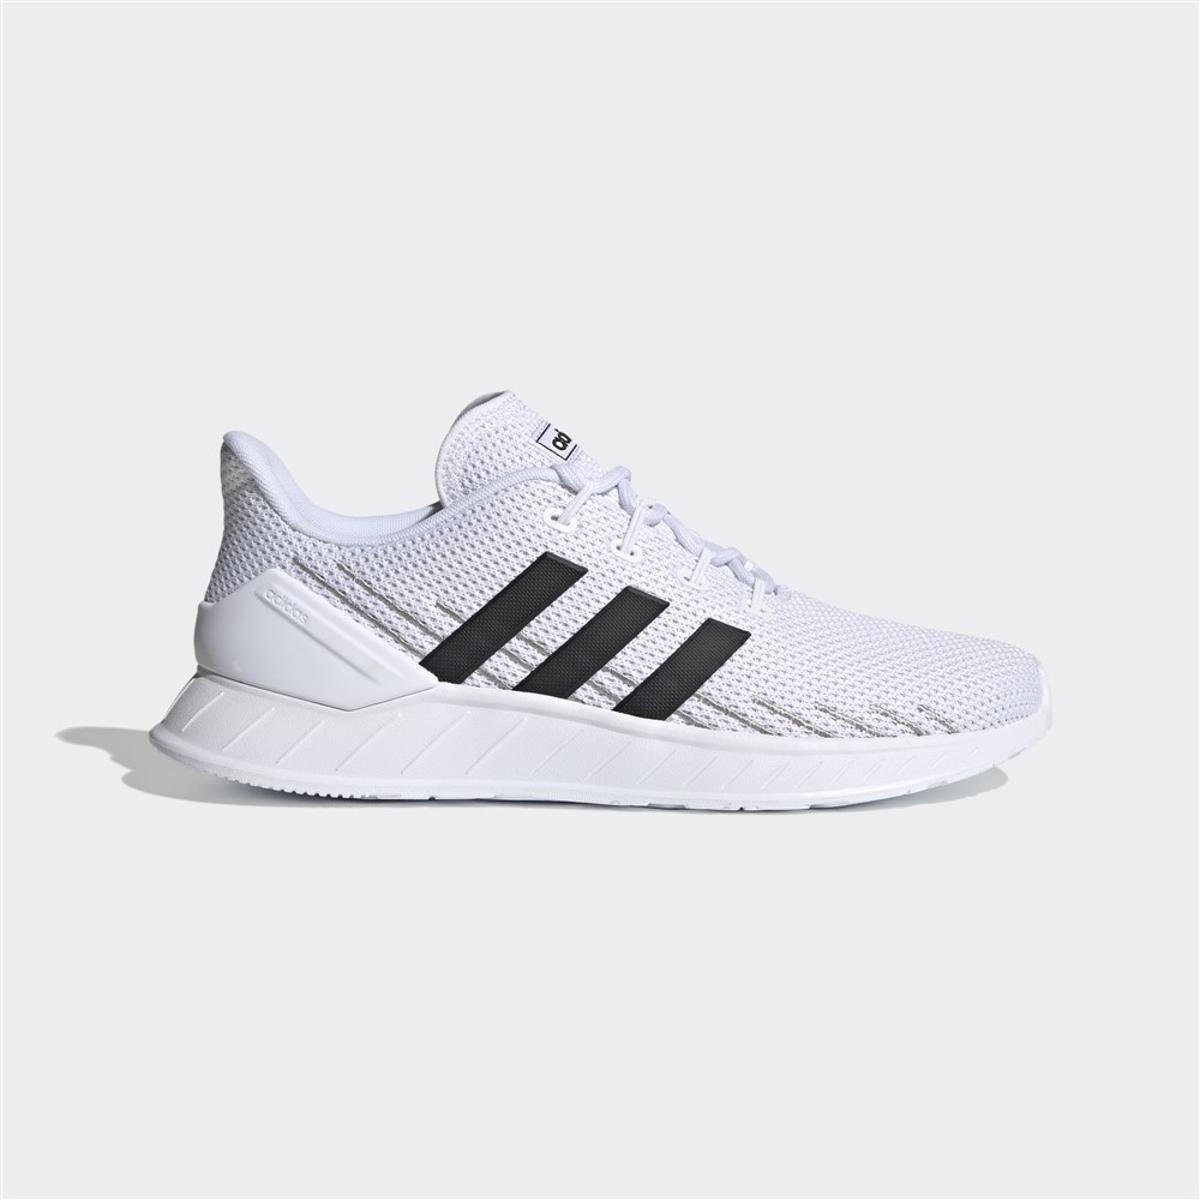 Adidas Running Shoes Best Price in Pakistan 